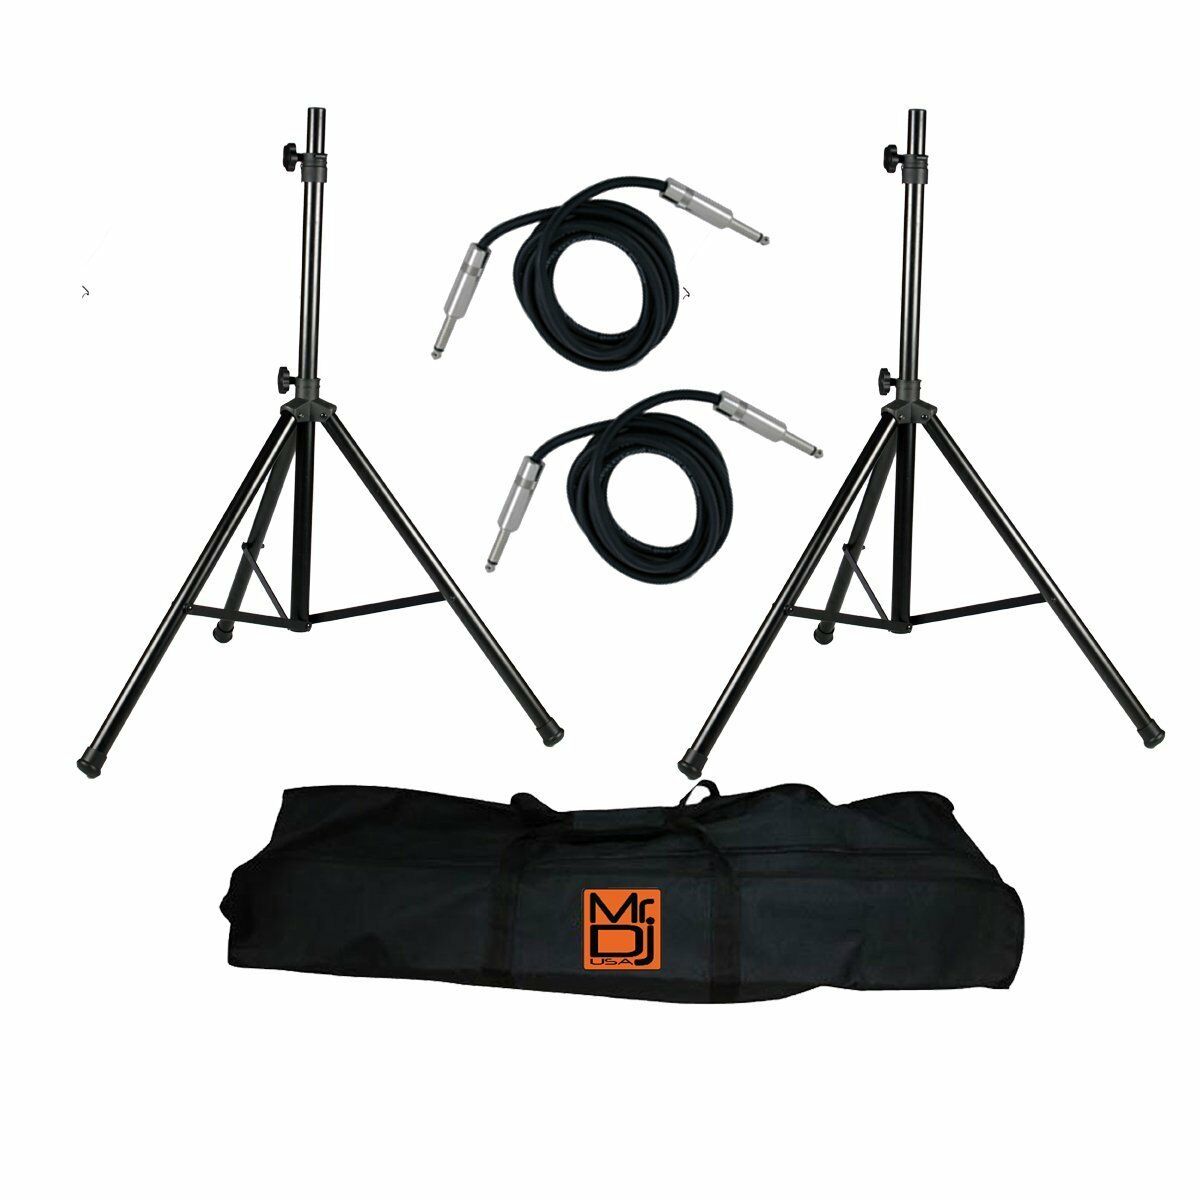 MR DJ SS750PKG Speaker Stand with Road Carrying Bag & 1/4" Cable<br/> Universal Black Heavy Duty Folding Tripod PRO PA DJ Home On Stage Speaker Stand Mount Holder with Road Carrying Bag & 2 1/4" 25' Cable